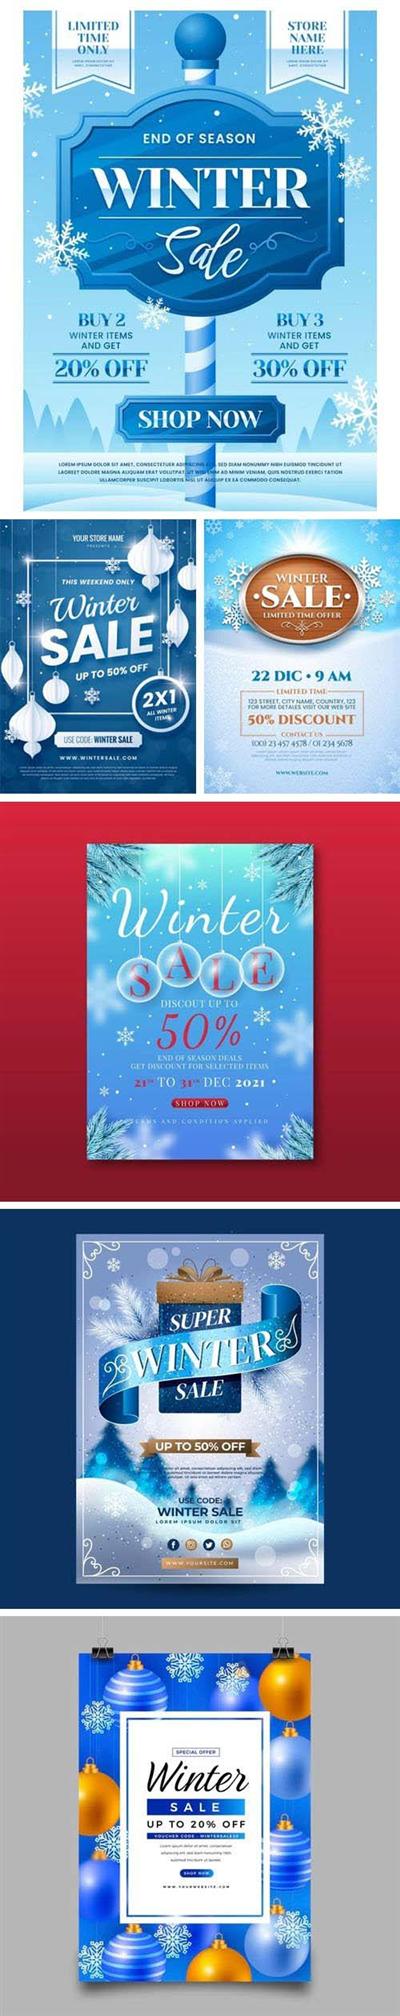 Winter Sale Posters Vector Templates